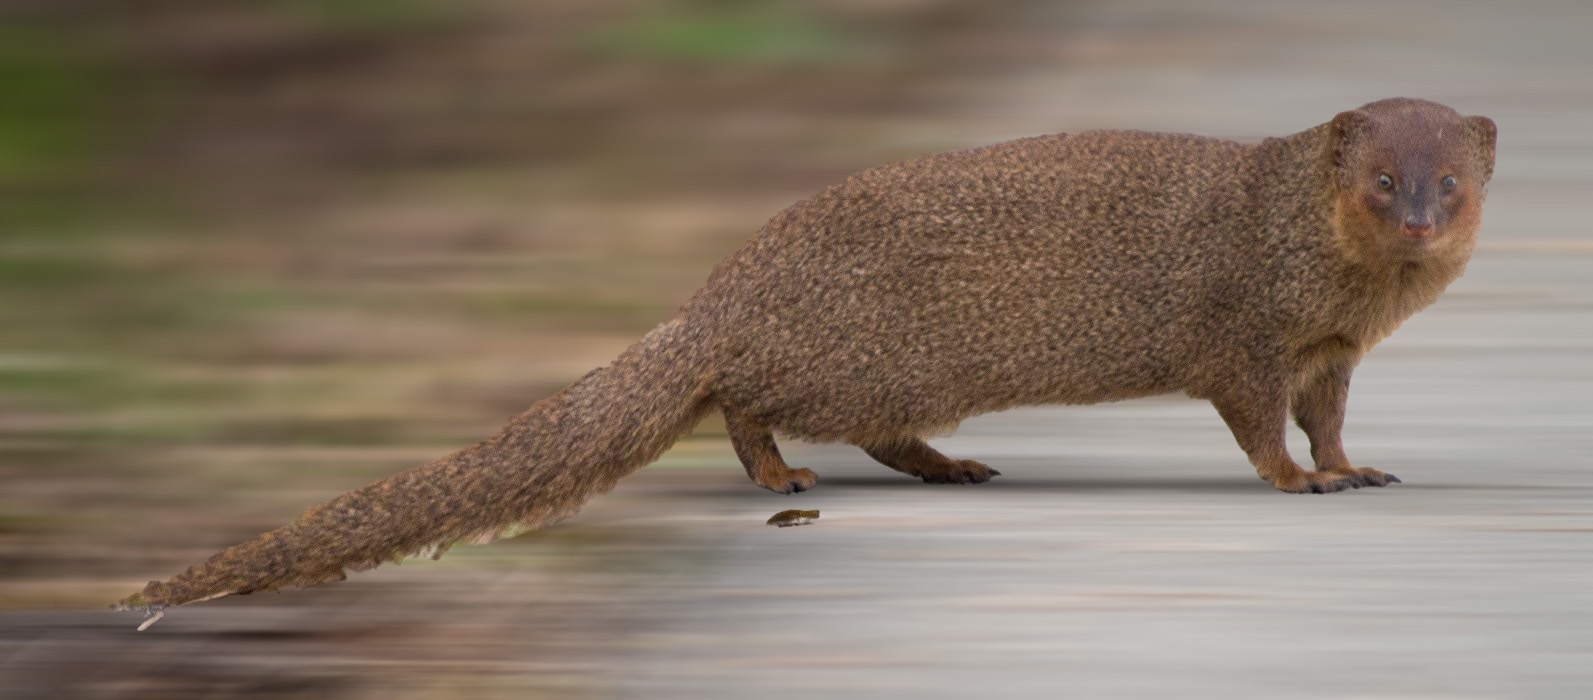 548 Indian Grey Mongoose Images, Stock Photos, 3D objects, & Vectors |  Shutterstock